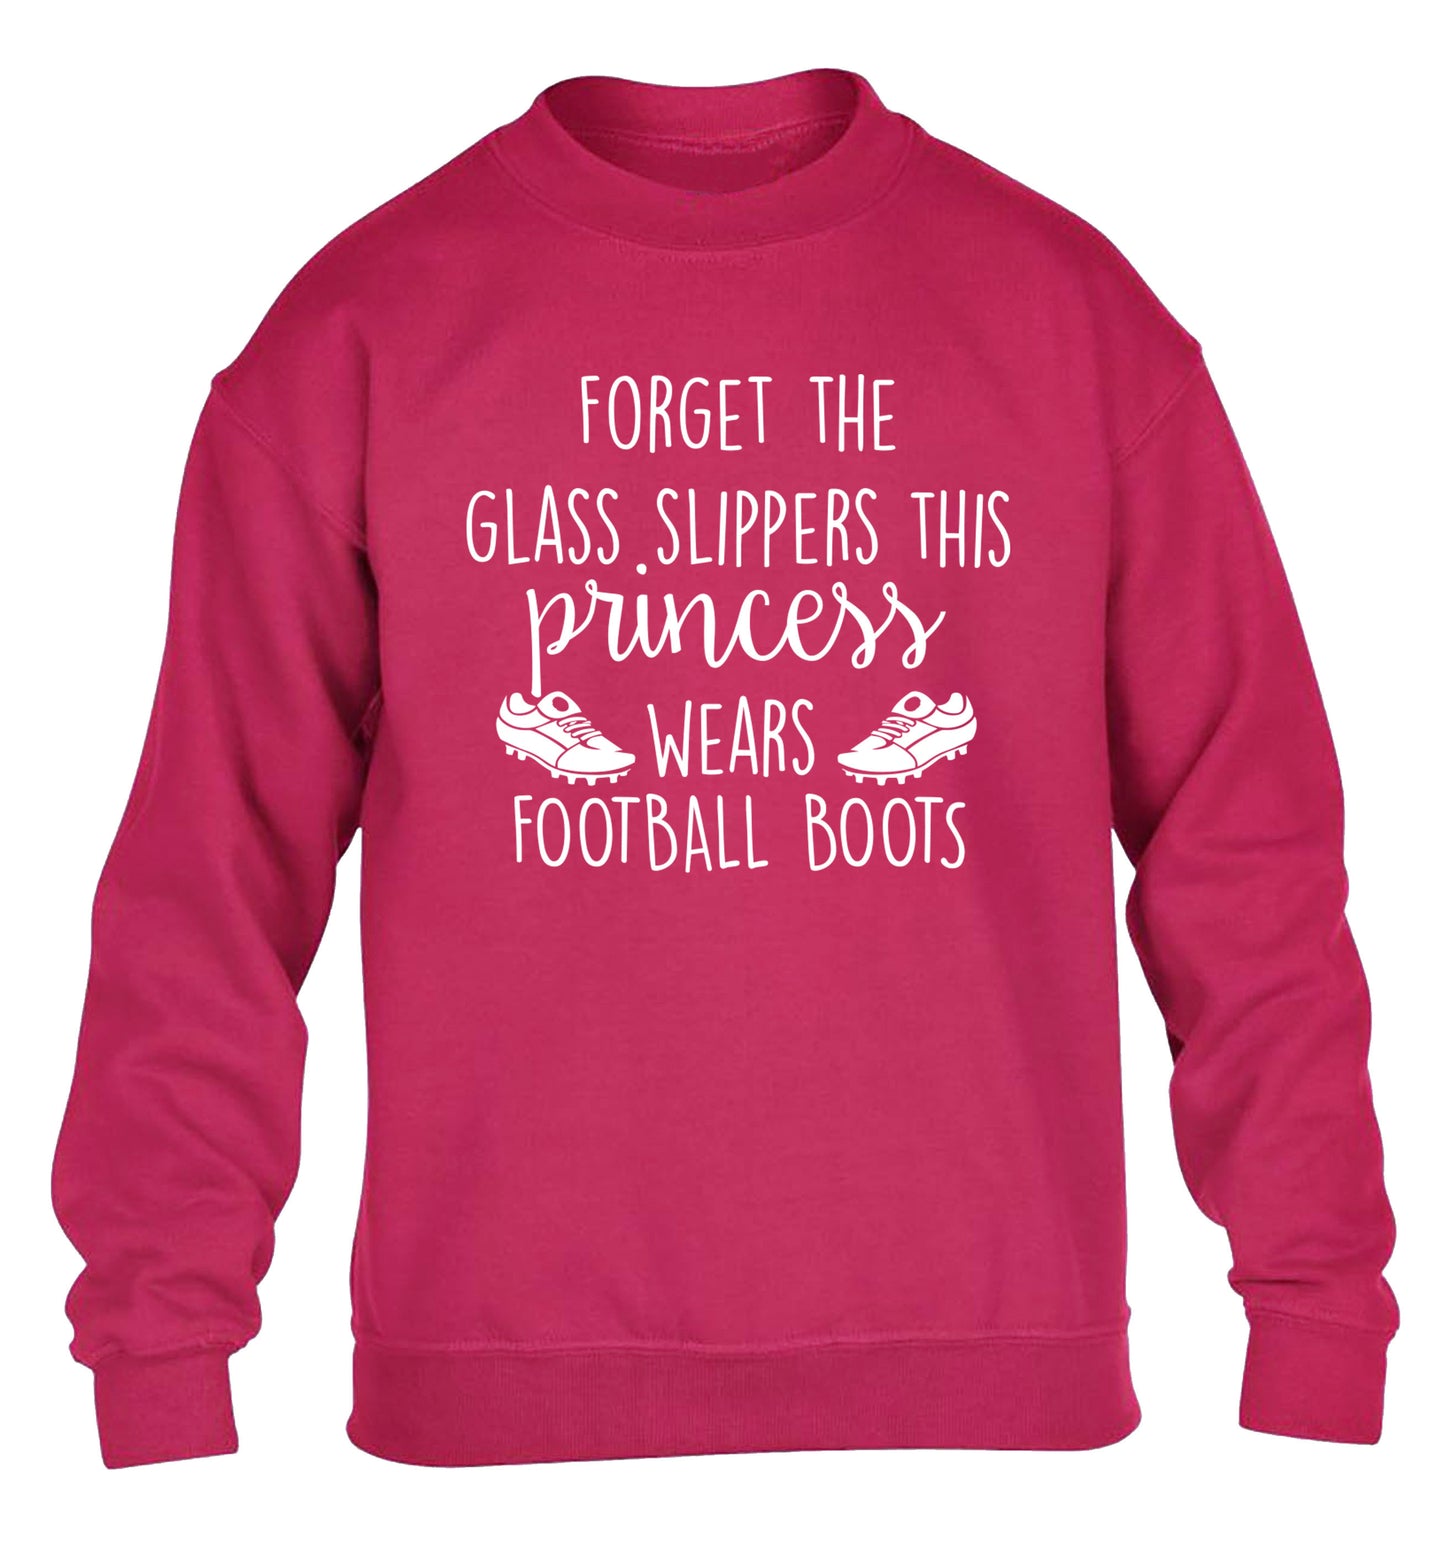 Forget the glass slippers this princess wears football boots children's pink sweater 12-14 Years